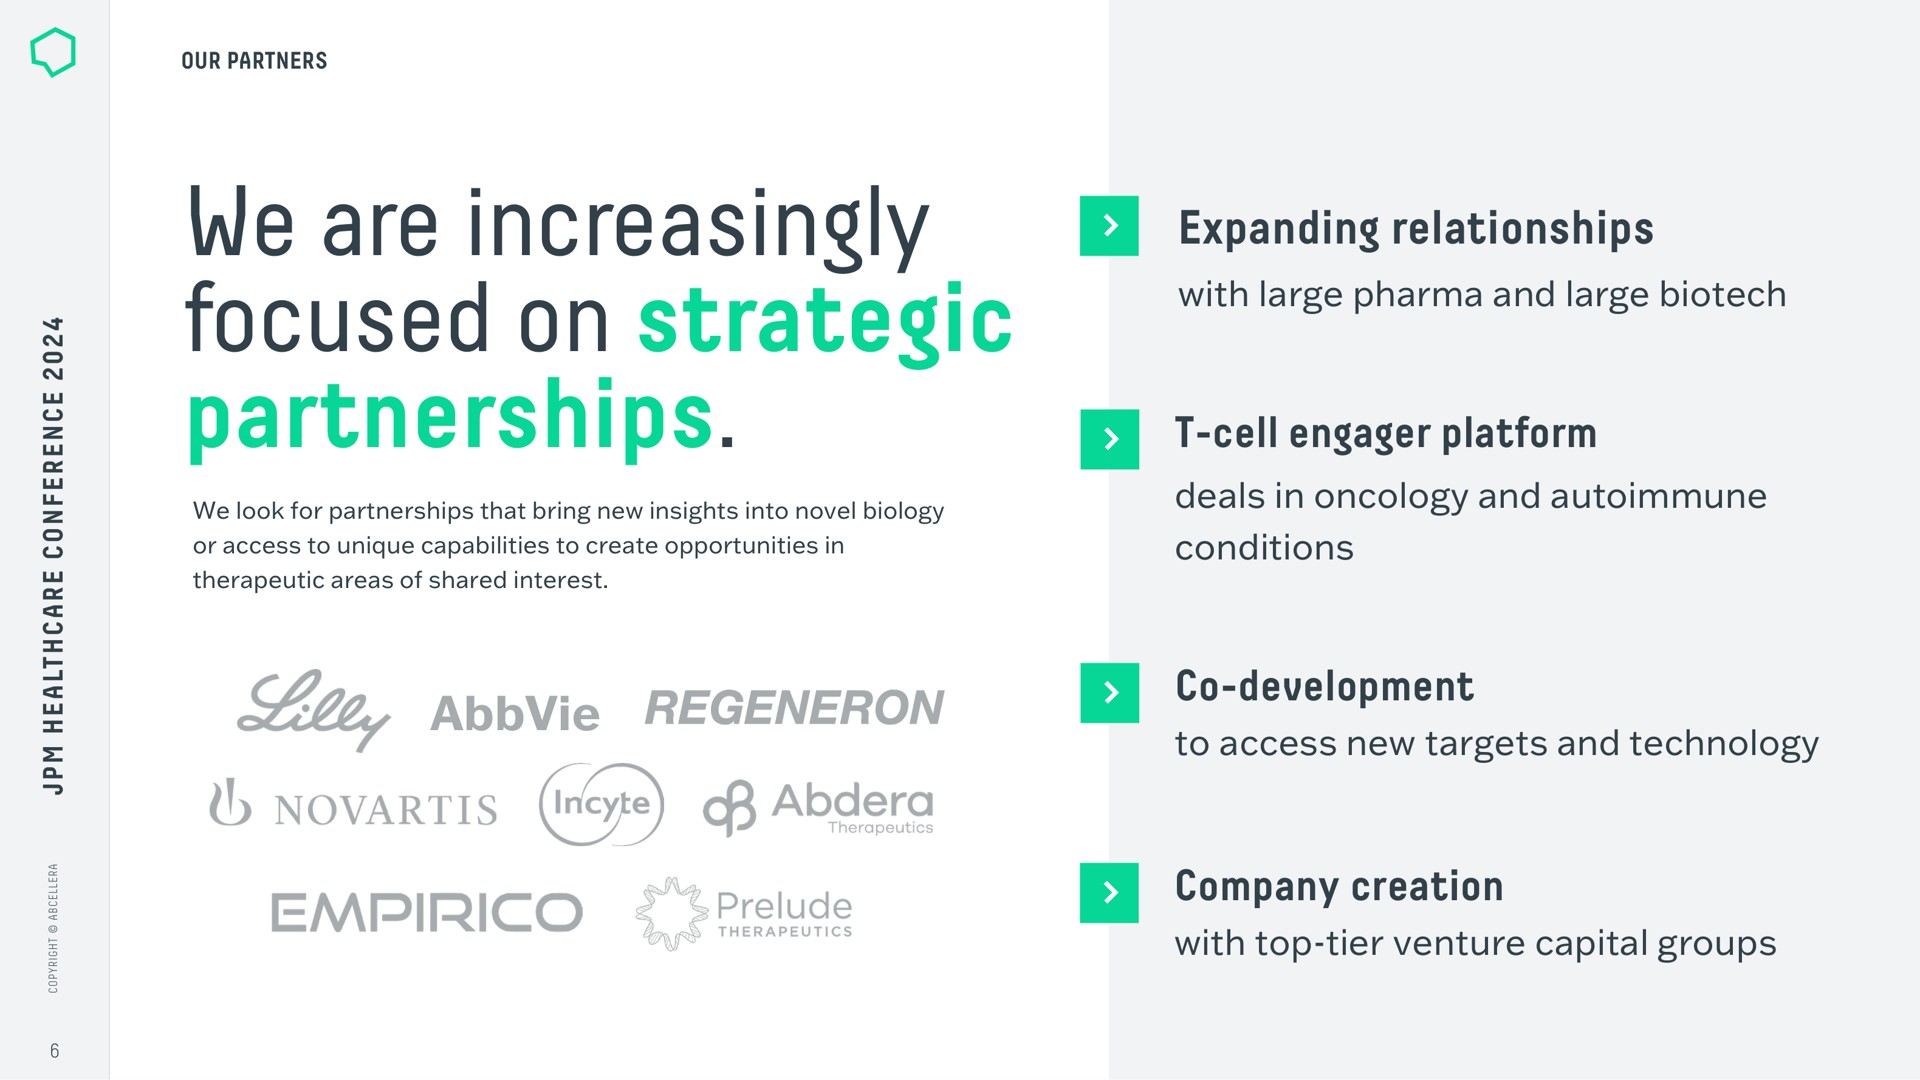 we are increasingly focused on strategic partnerships expanding relationships cell engager platform development company creation prelude with large and large deals in oncology and conditions to access new targets and technology with top tier venture capital groups | AbCellera